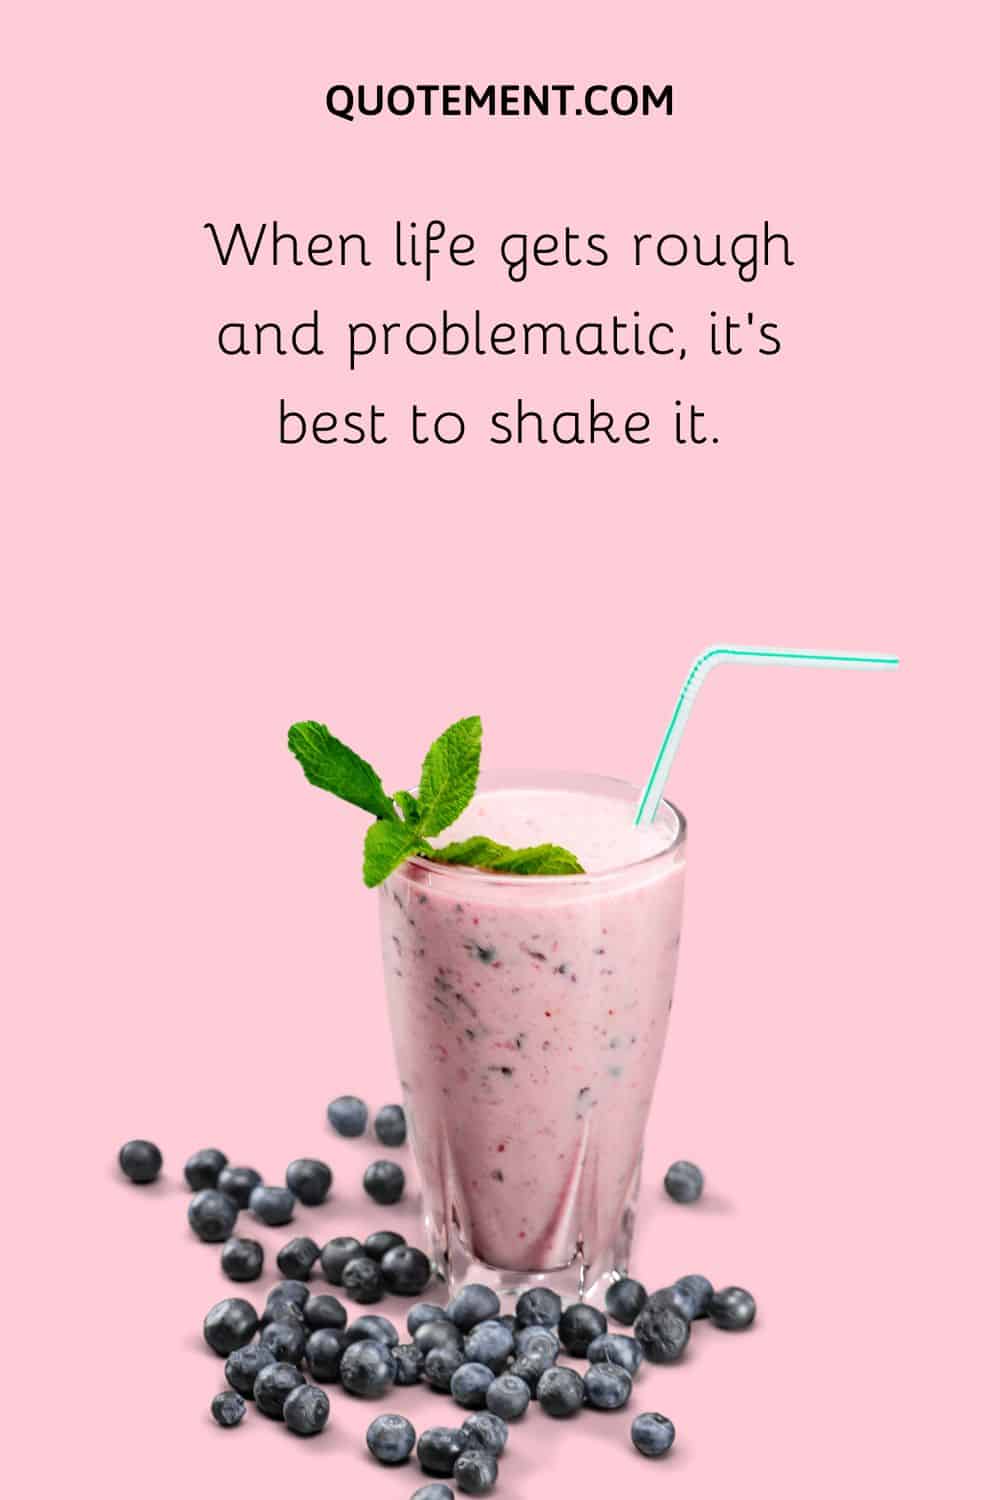 When life gets rough and problematic, it’s best to shake it.